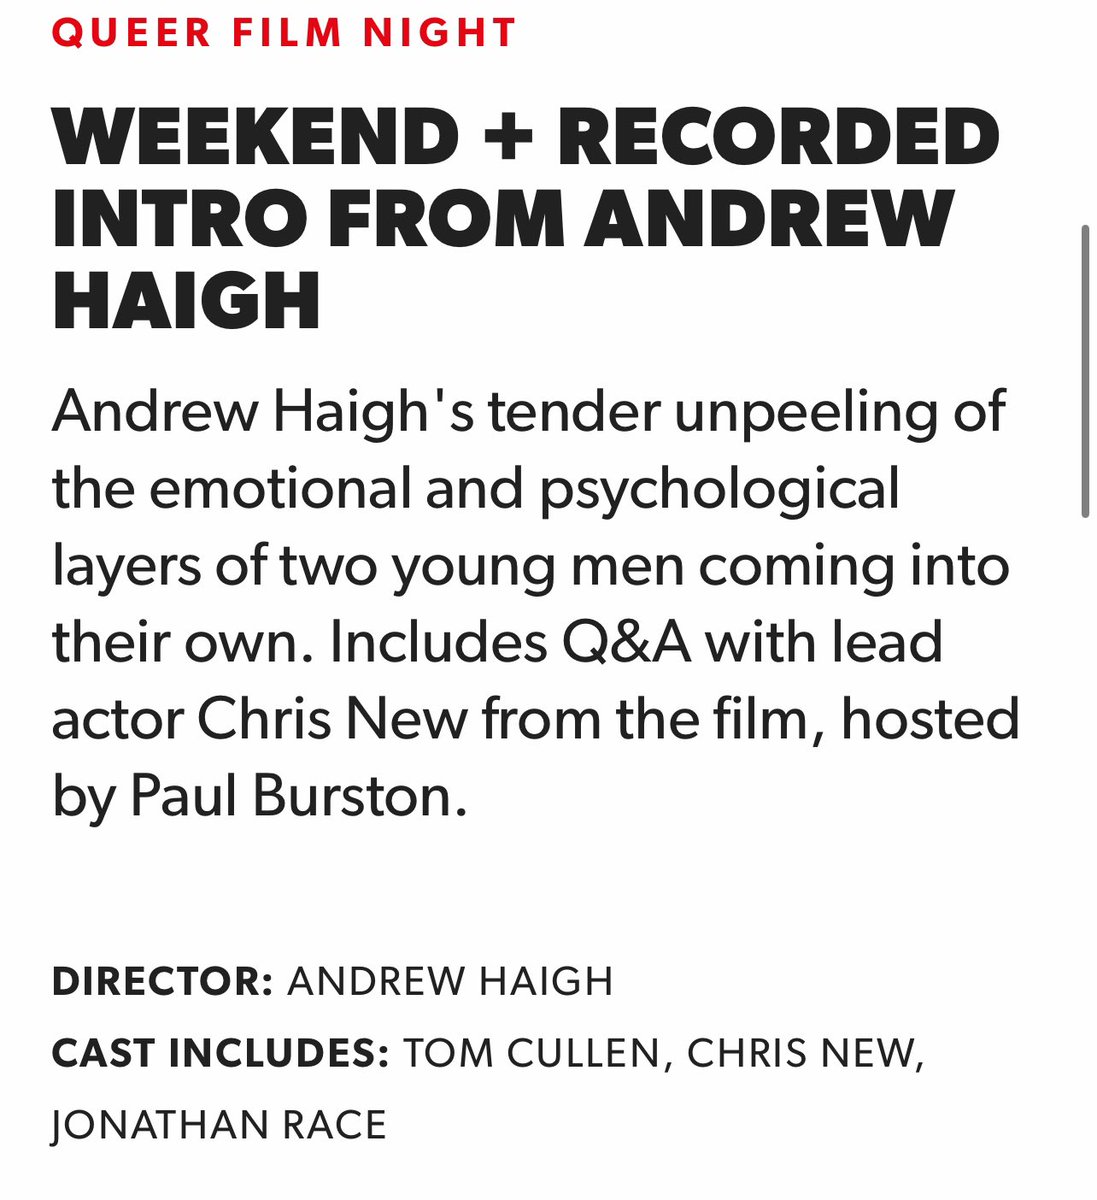 Next Sunday evening I’ll be interviewing actor Chris New at this screening of Weekend at @Electric_palace Hastings electricpalacecinema.com/whats-on/weeke…